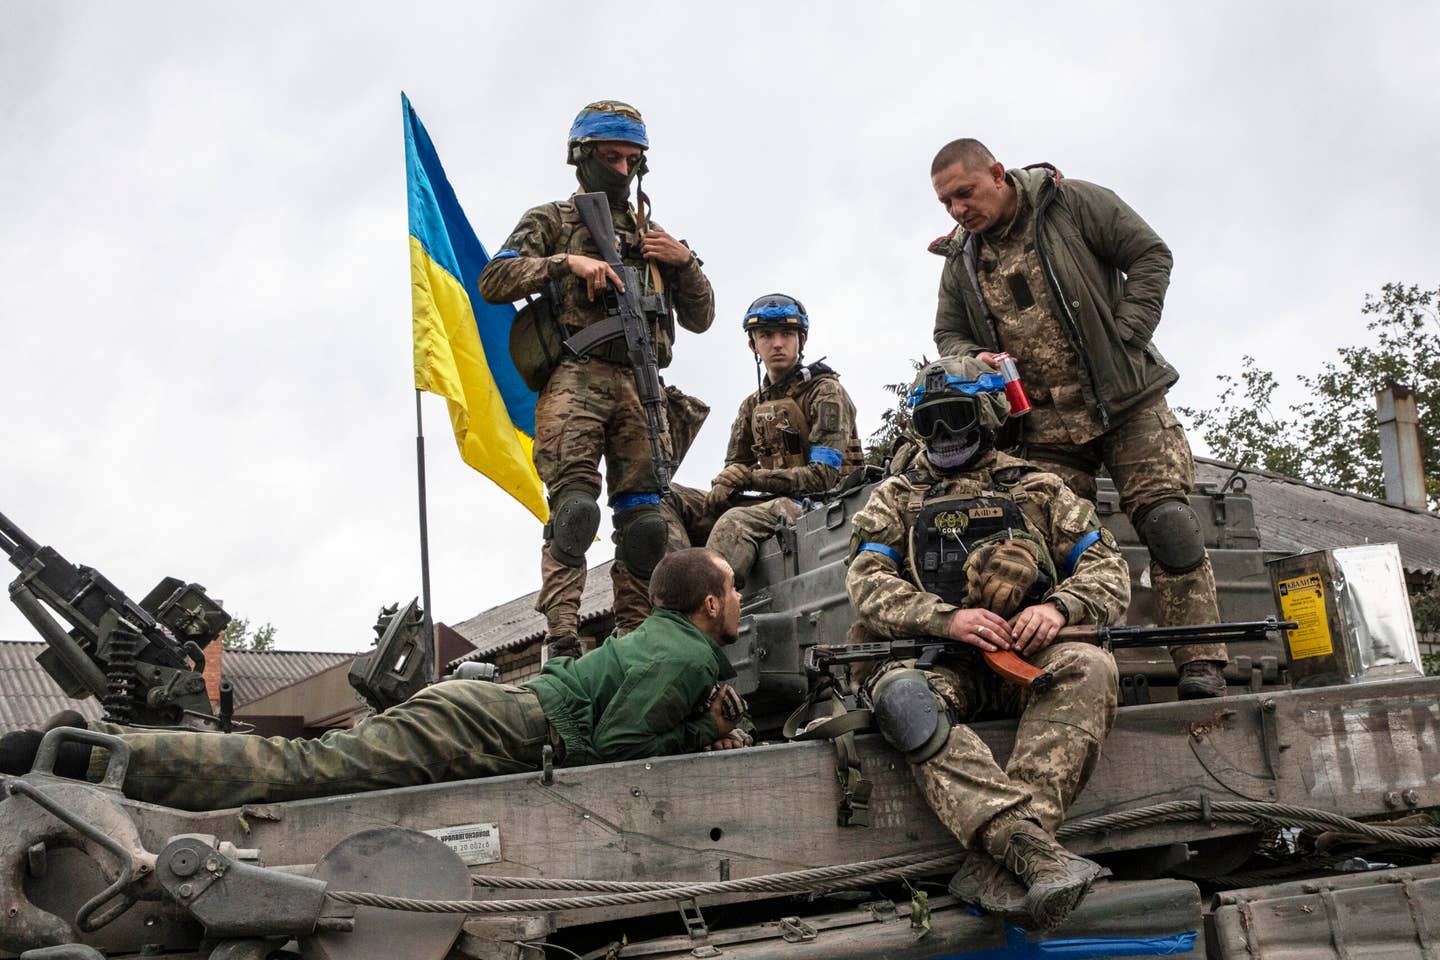 A Russian soldier, taken prisoner, on a tank with Ukrainian soldiers after the city was recaptured from Russian forces on September 11, 2022 in Izyum, Ukraine. (Photo Laurent Van der Stockt for Le Monde/Getty Images)